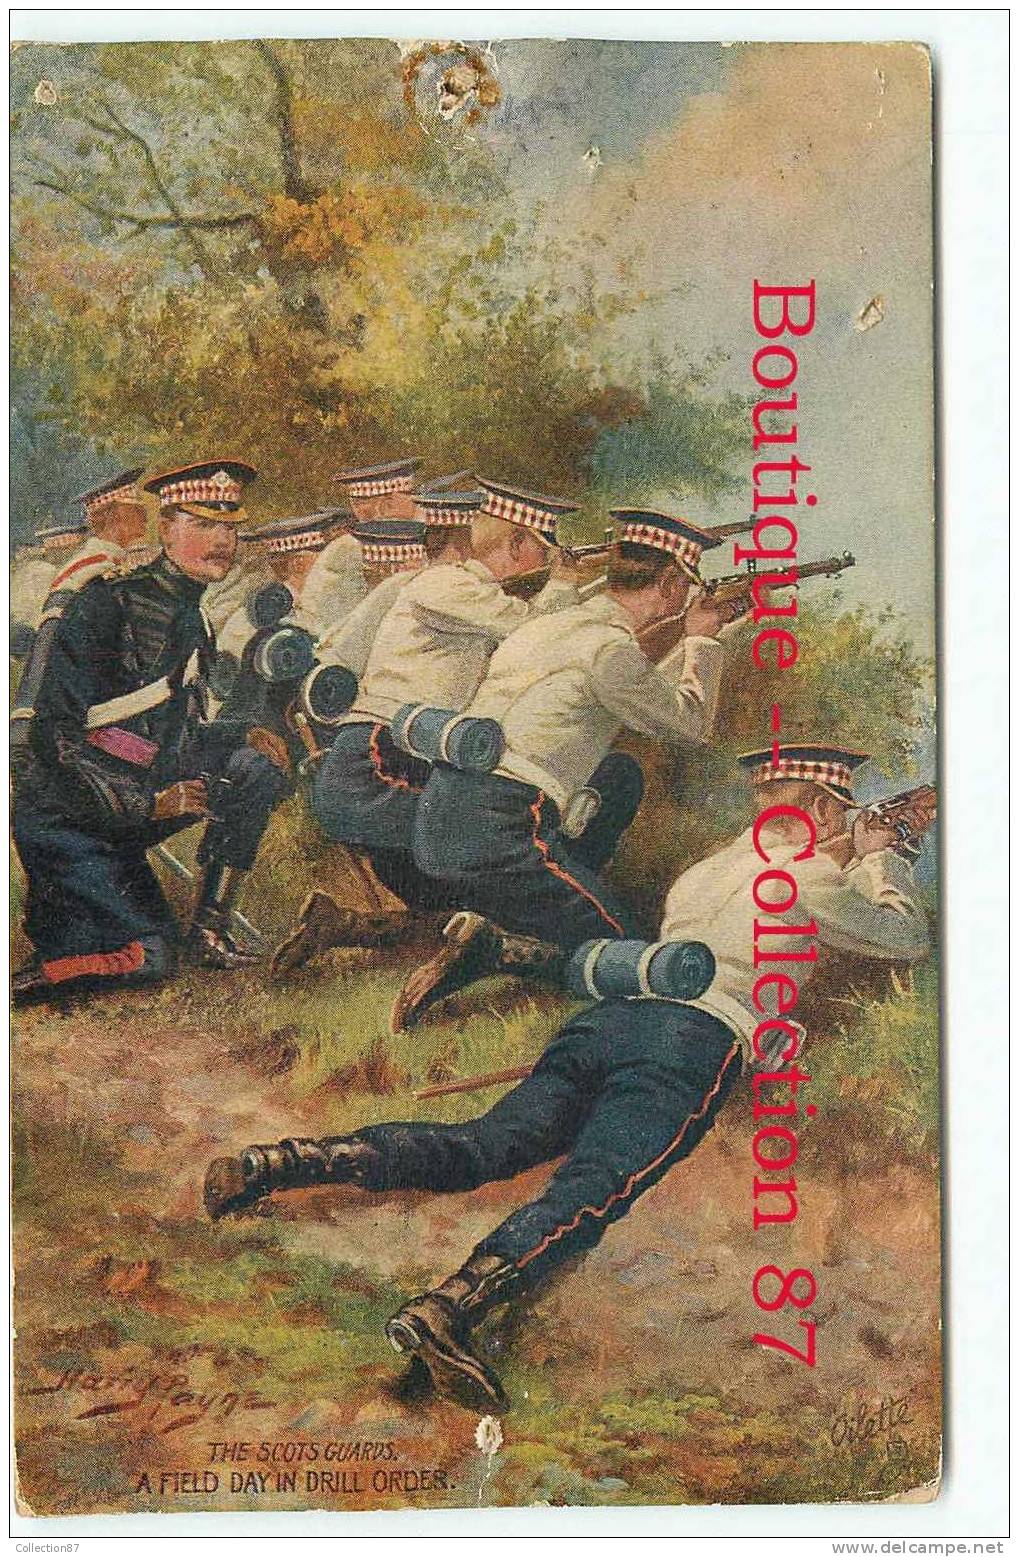 RAPHAEL TUCK - THE SCOTS GUARD TUCK´S POSTCARD N° 8625 - MILITARY - A FIELD DAY IN DRILL ORDER - DOS VISIBLE - Tuck, Raphael